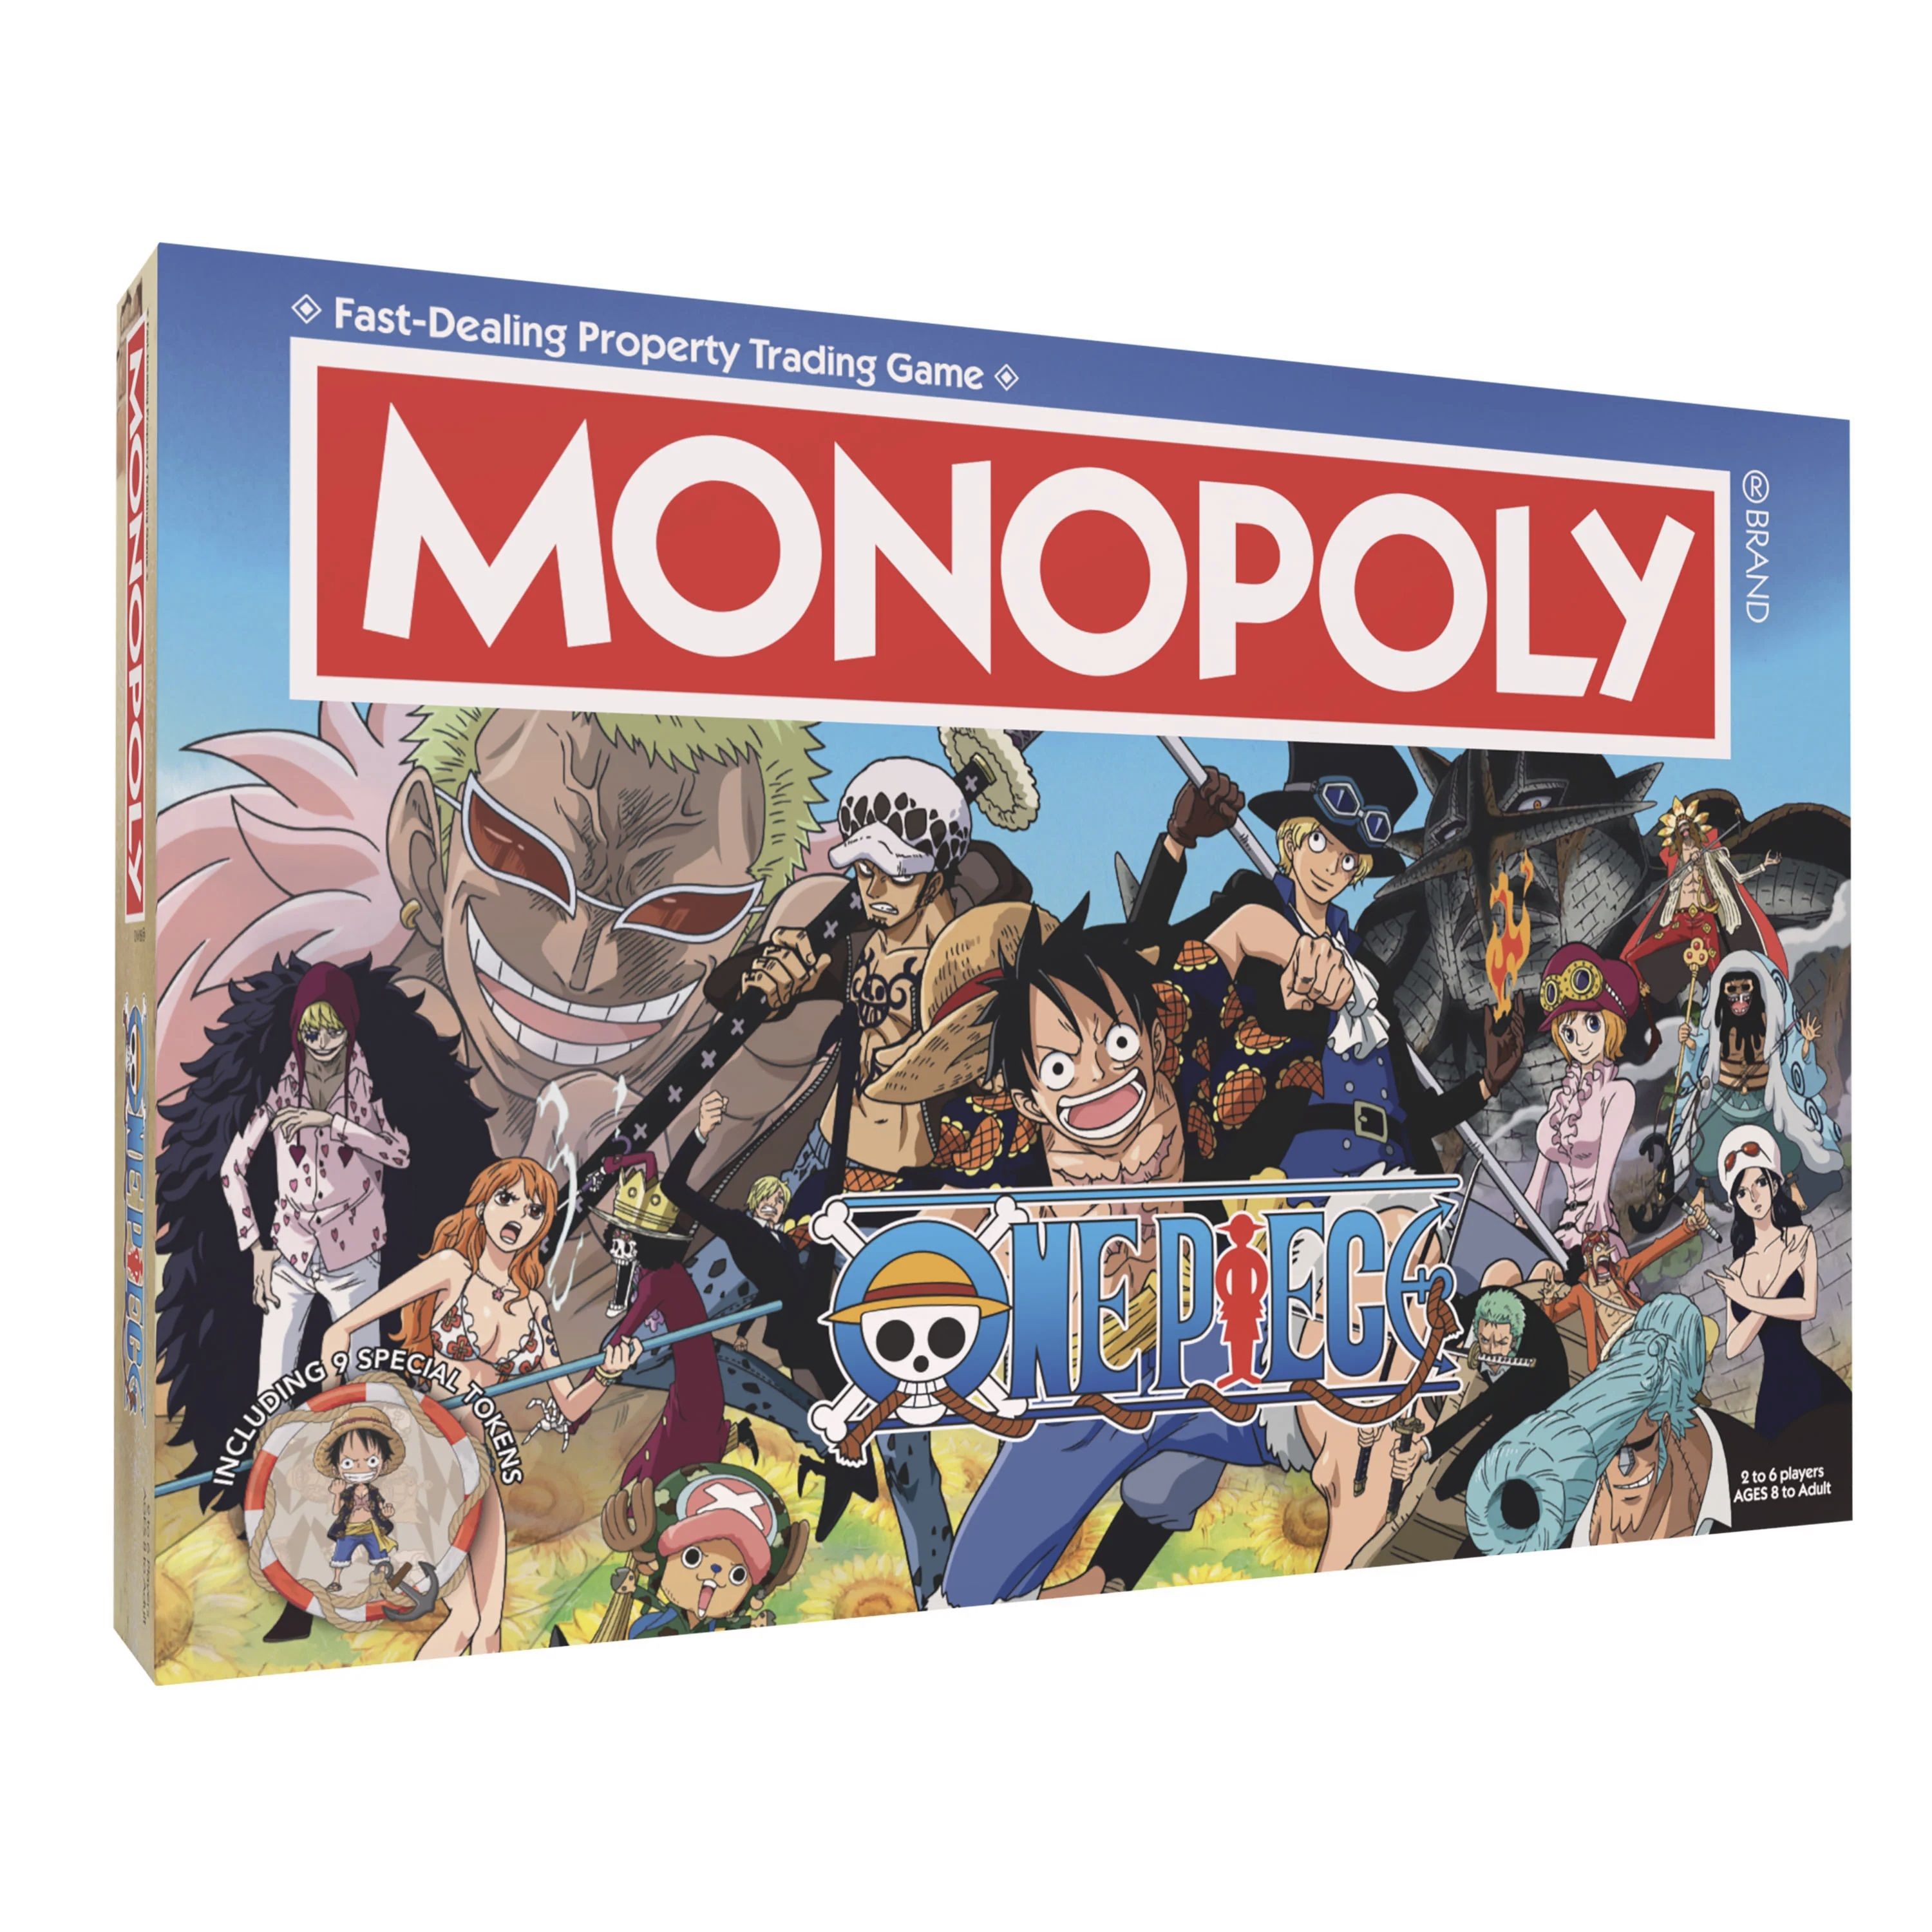 Official One Piece edition Monopoly